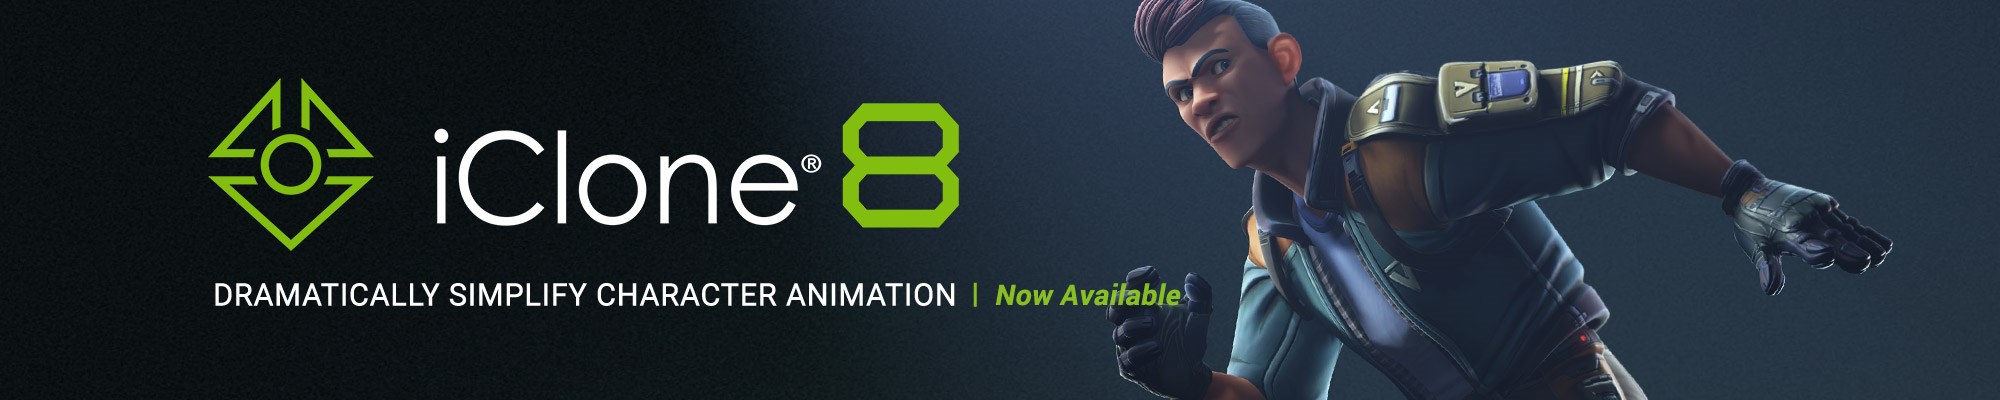 iClone 8 - Dramatically Simplify Character Animation